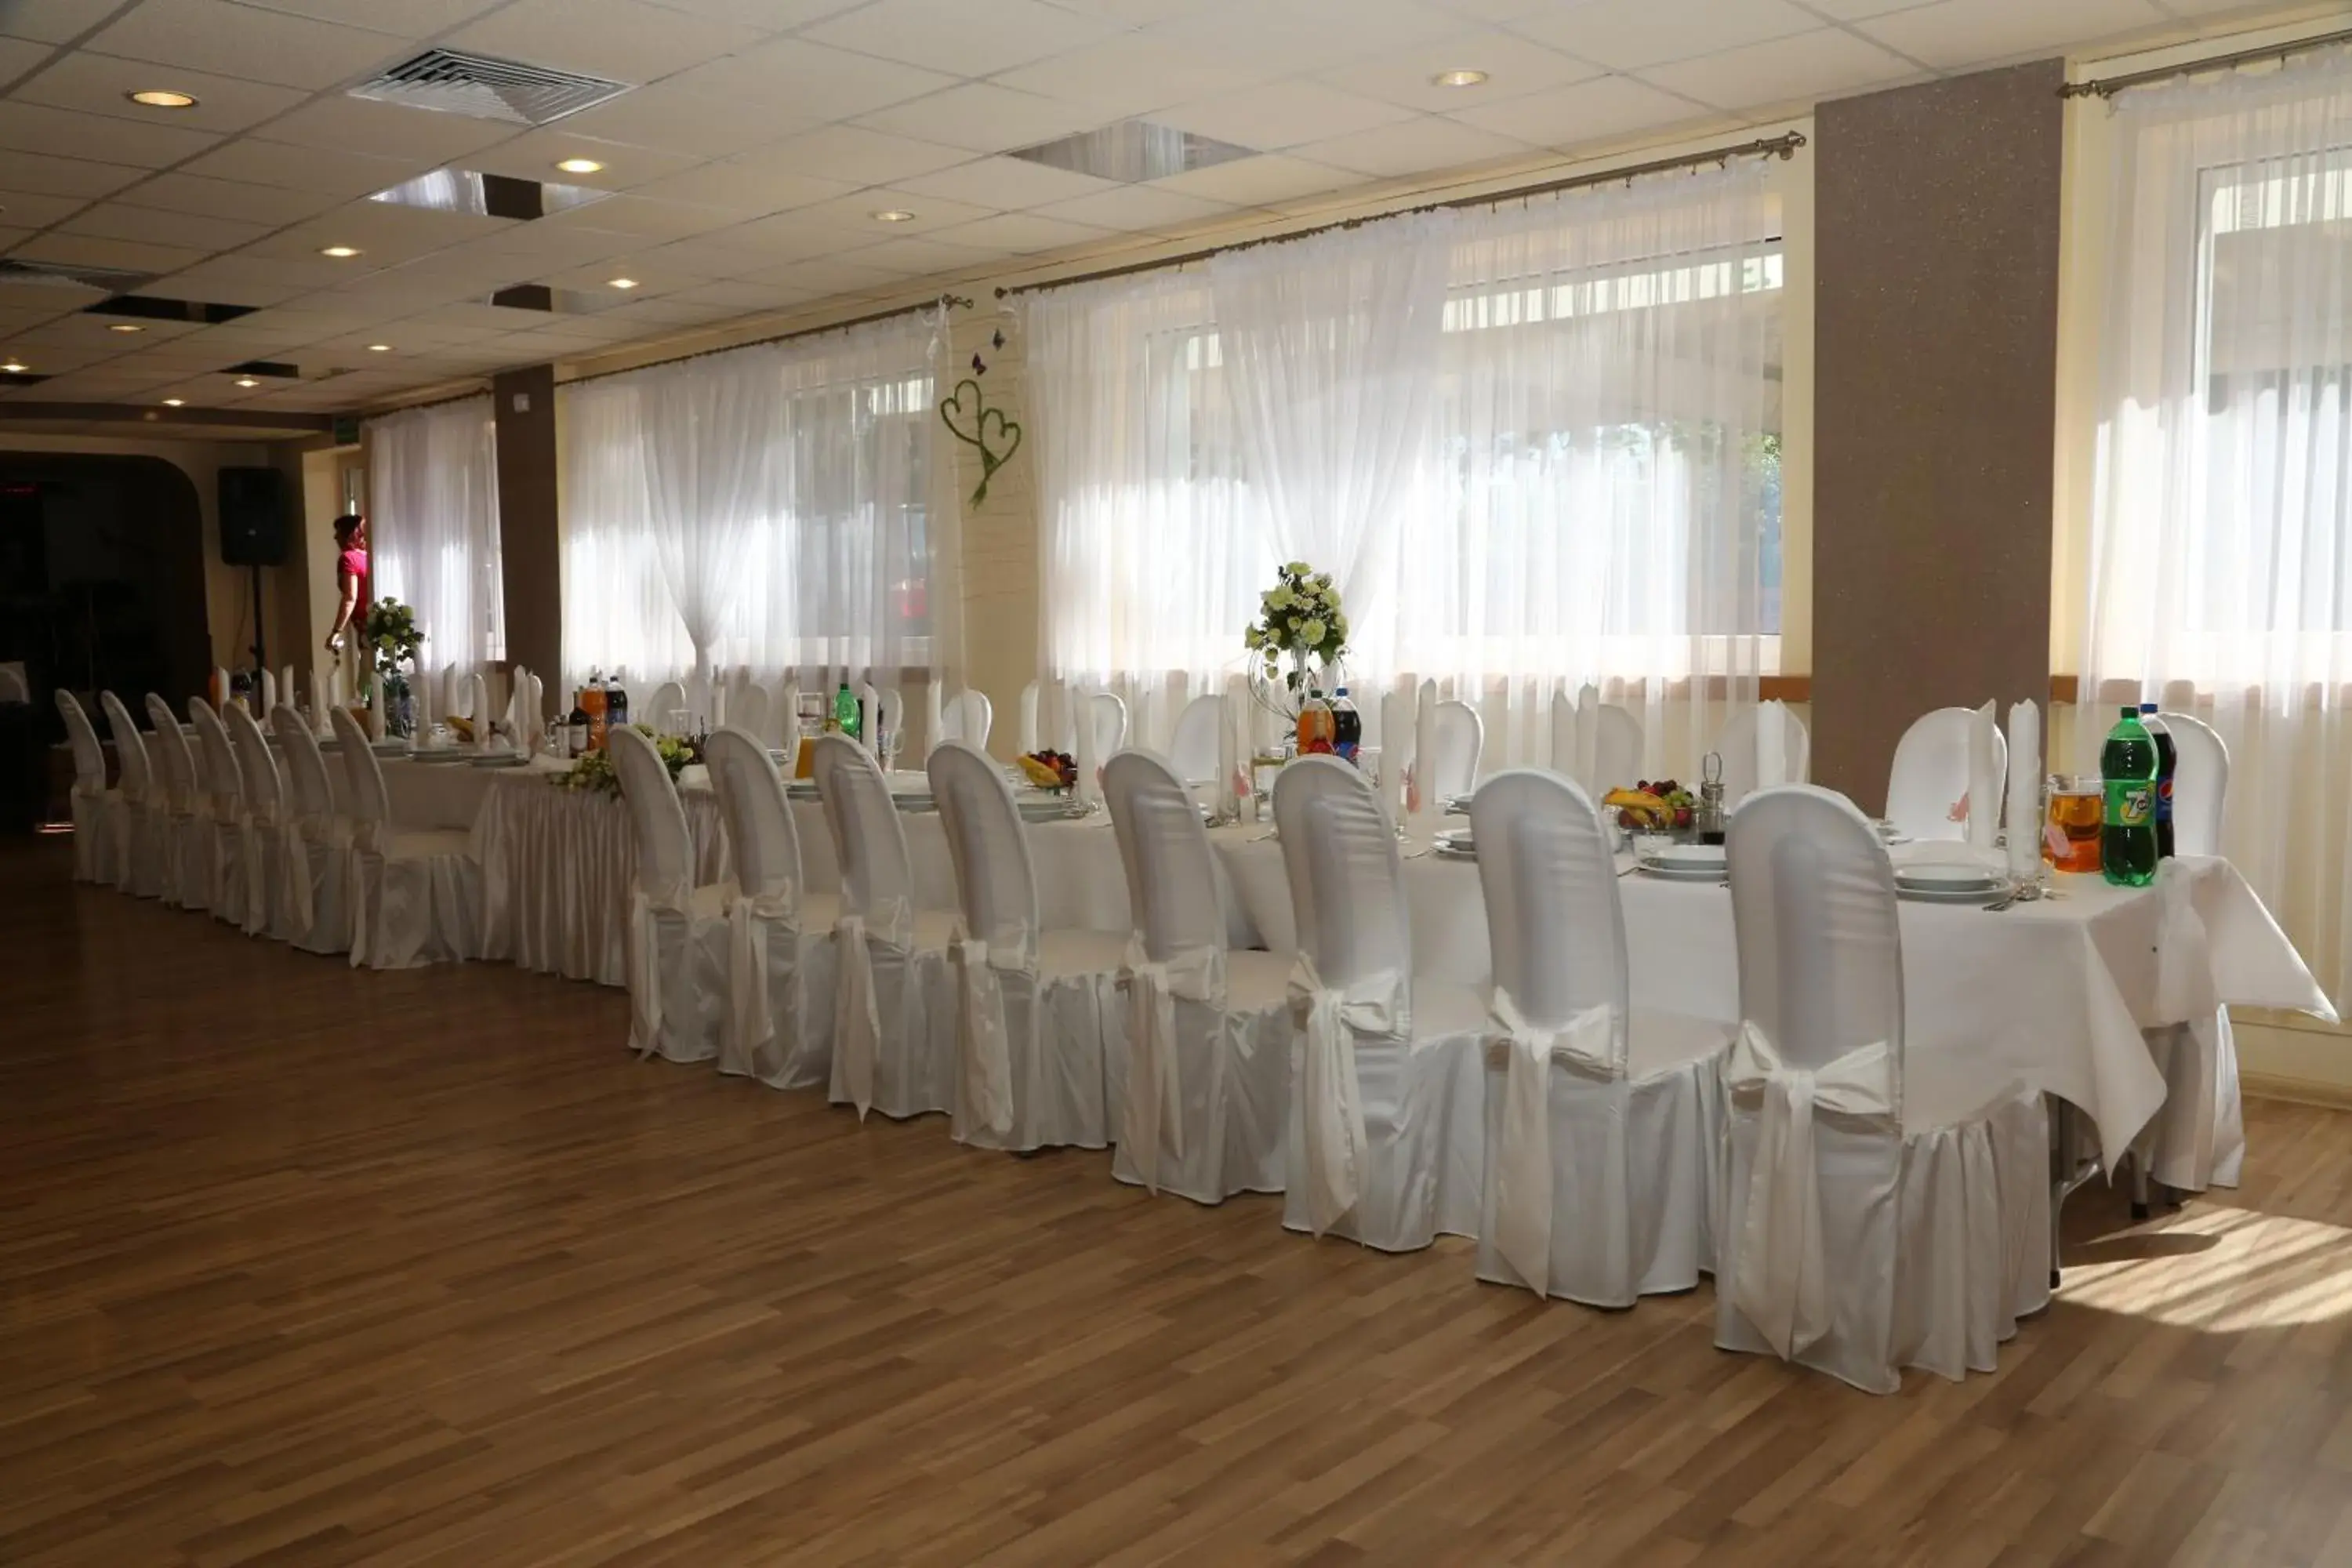 Day, Banquet Facilities in E.T. Hotel